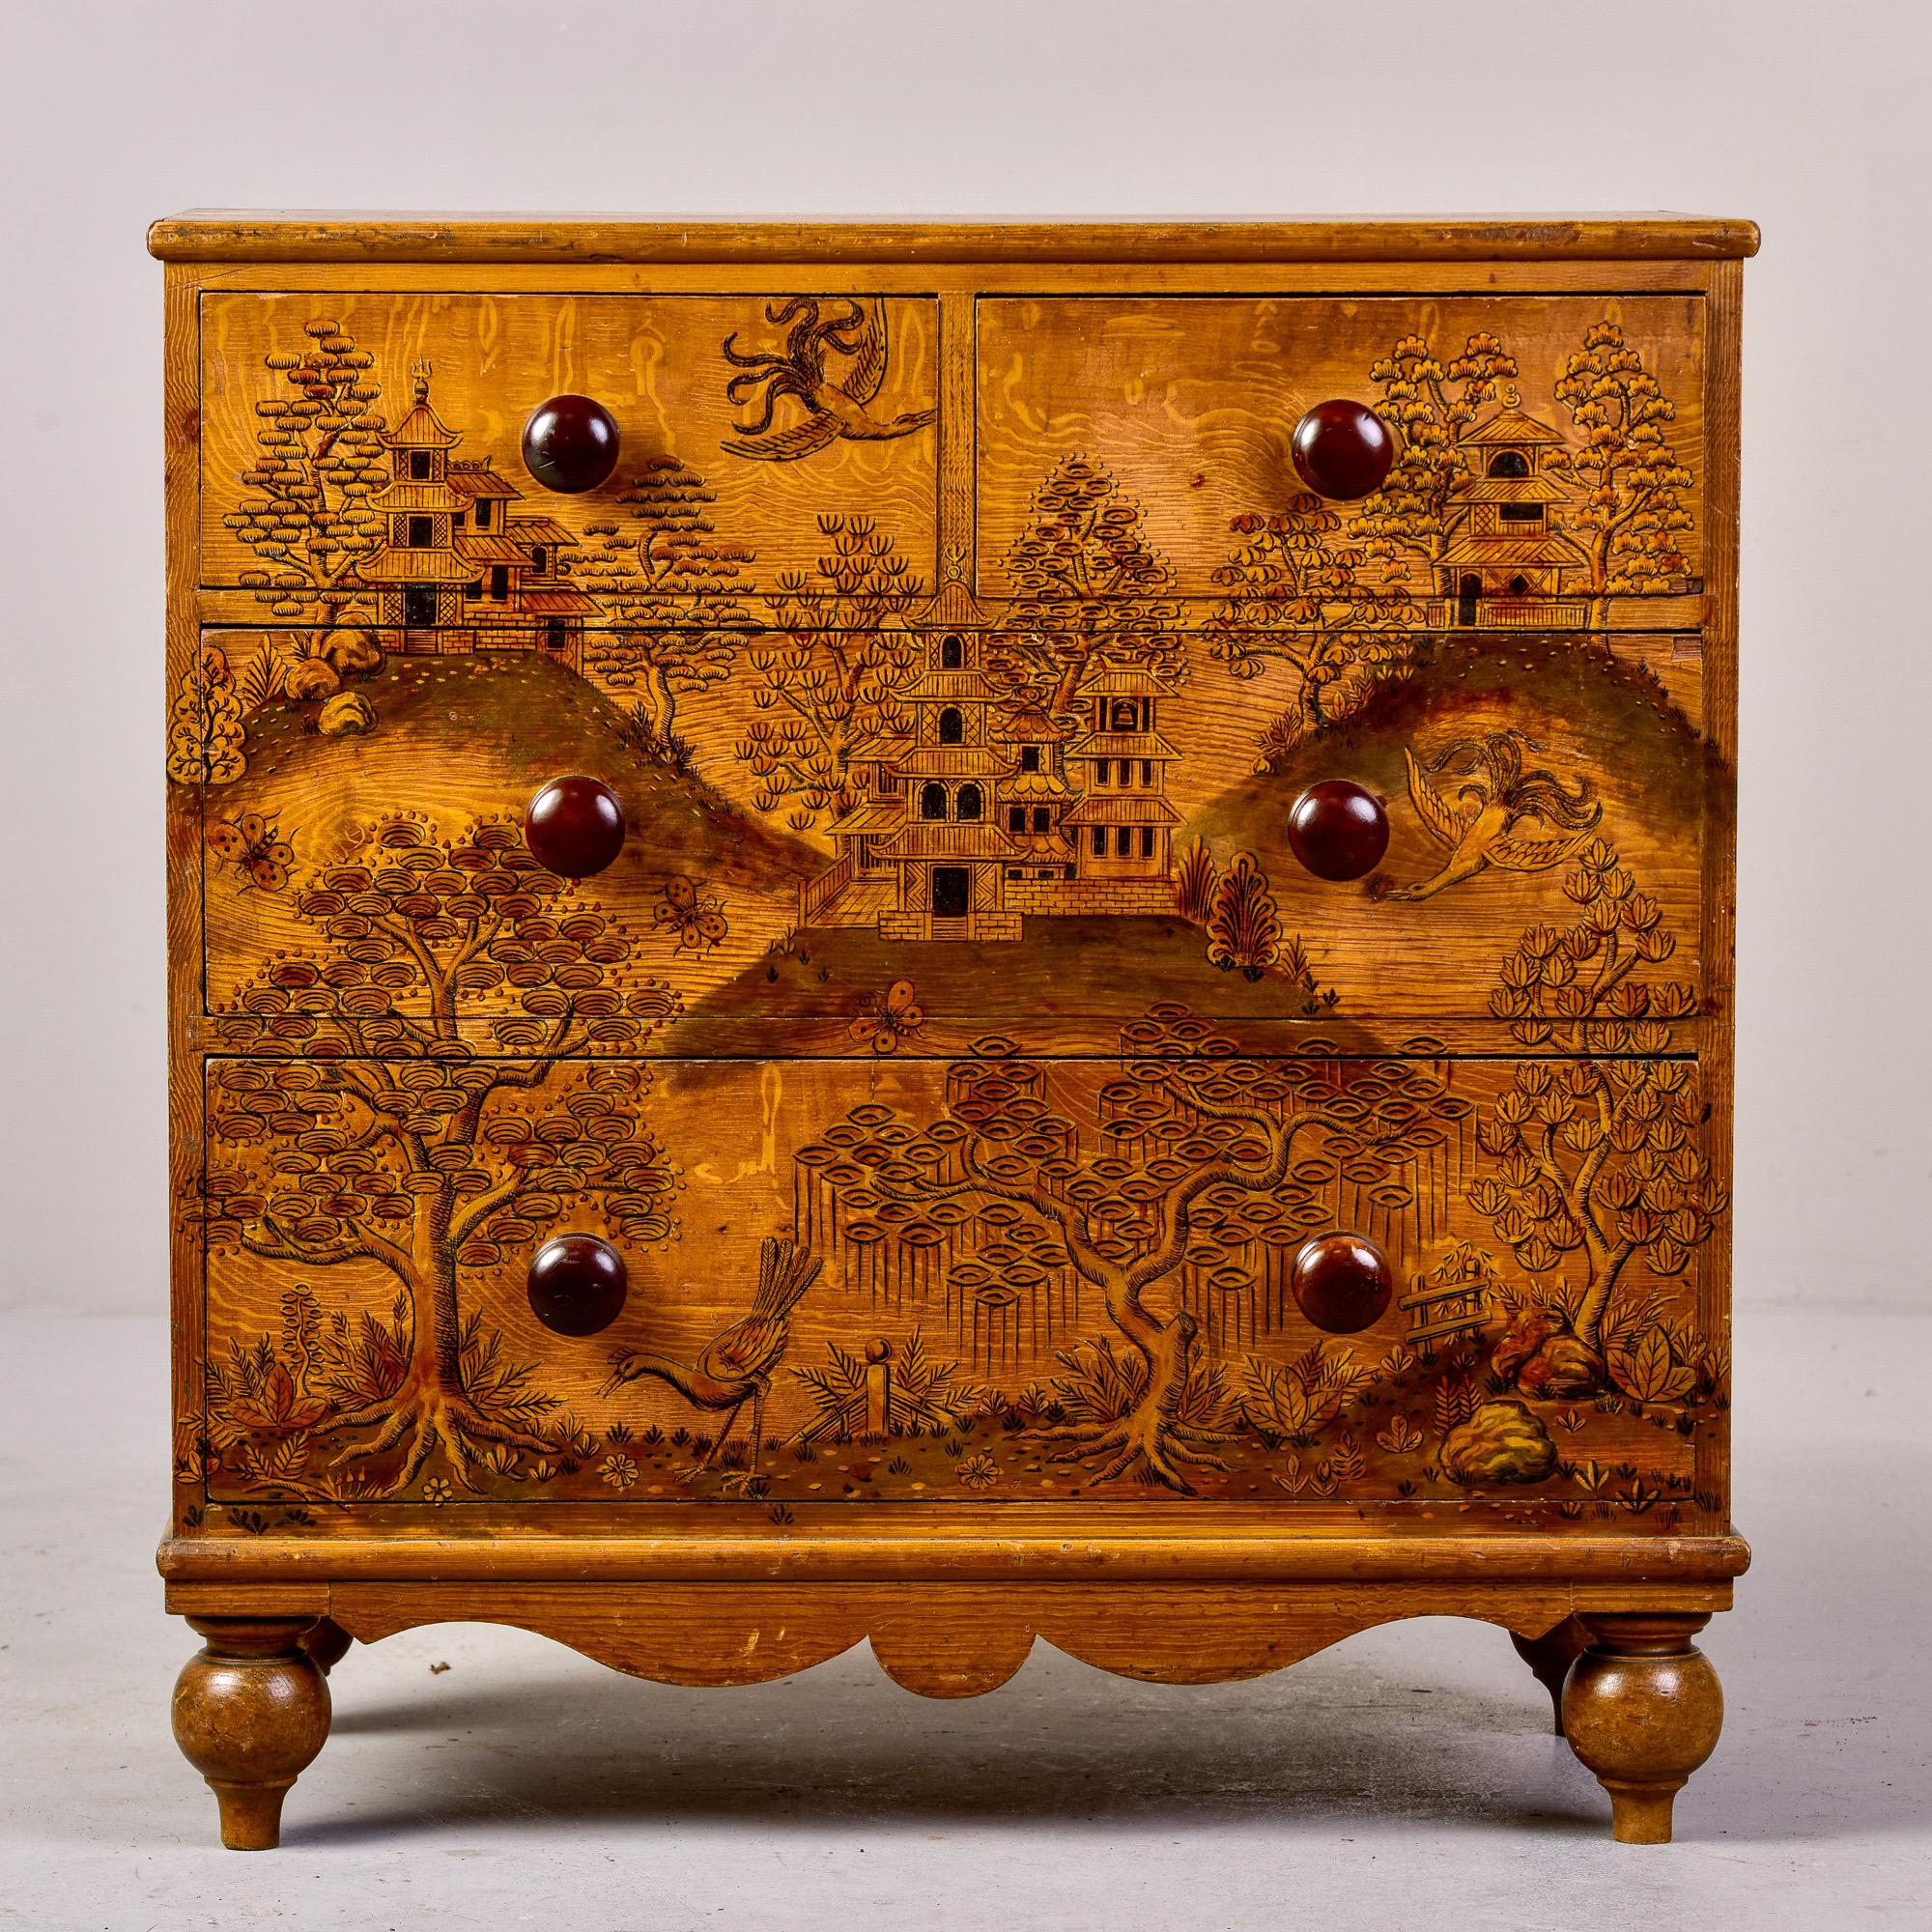 Circa 1940s French pine chest of four drawers with round feet, a curvy apron and elaborately rendered hand painted Asian scene in gold and black. Dovetail construction on drawers, contrasting dark wood knobs. Unknown maker.